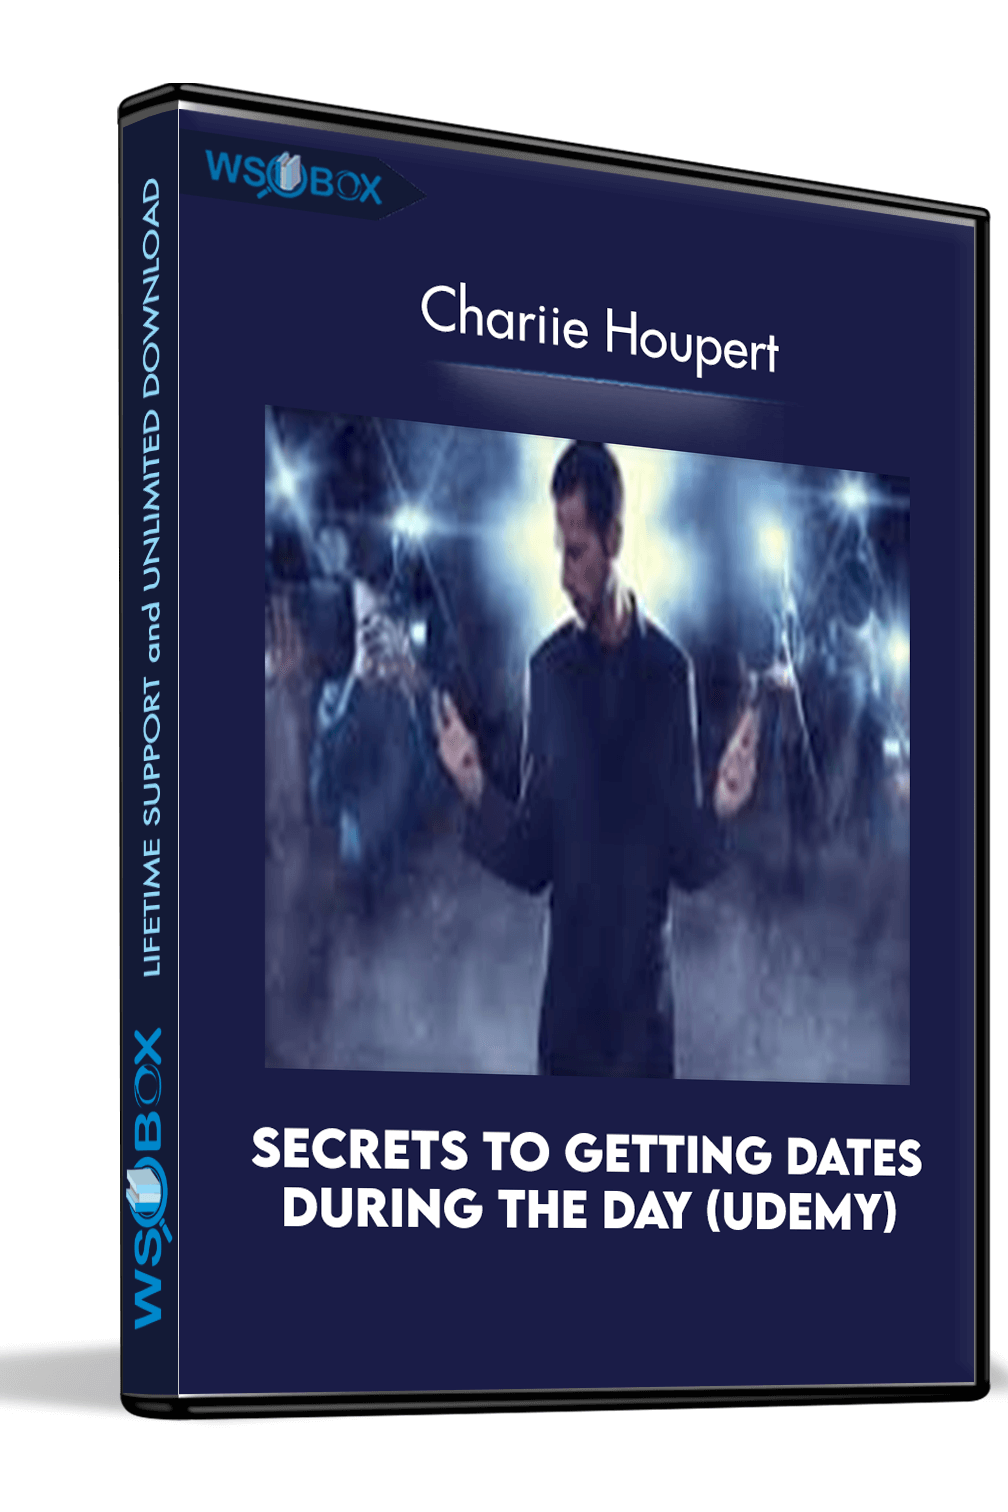 secrets-to-getting-dates-during-the-day-udemy-chariie-houpert